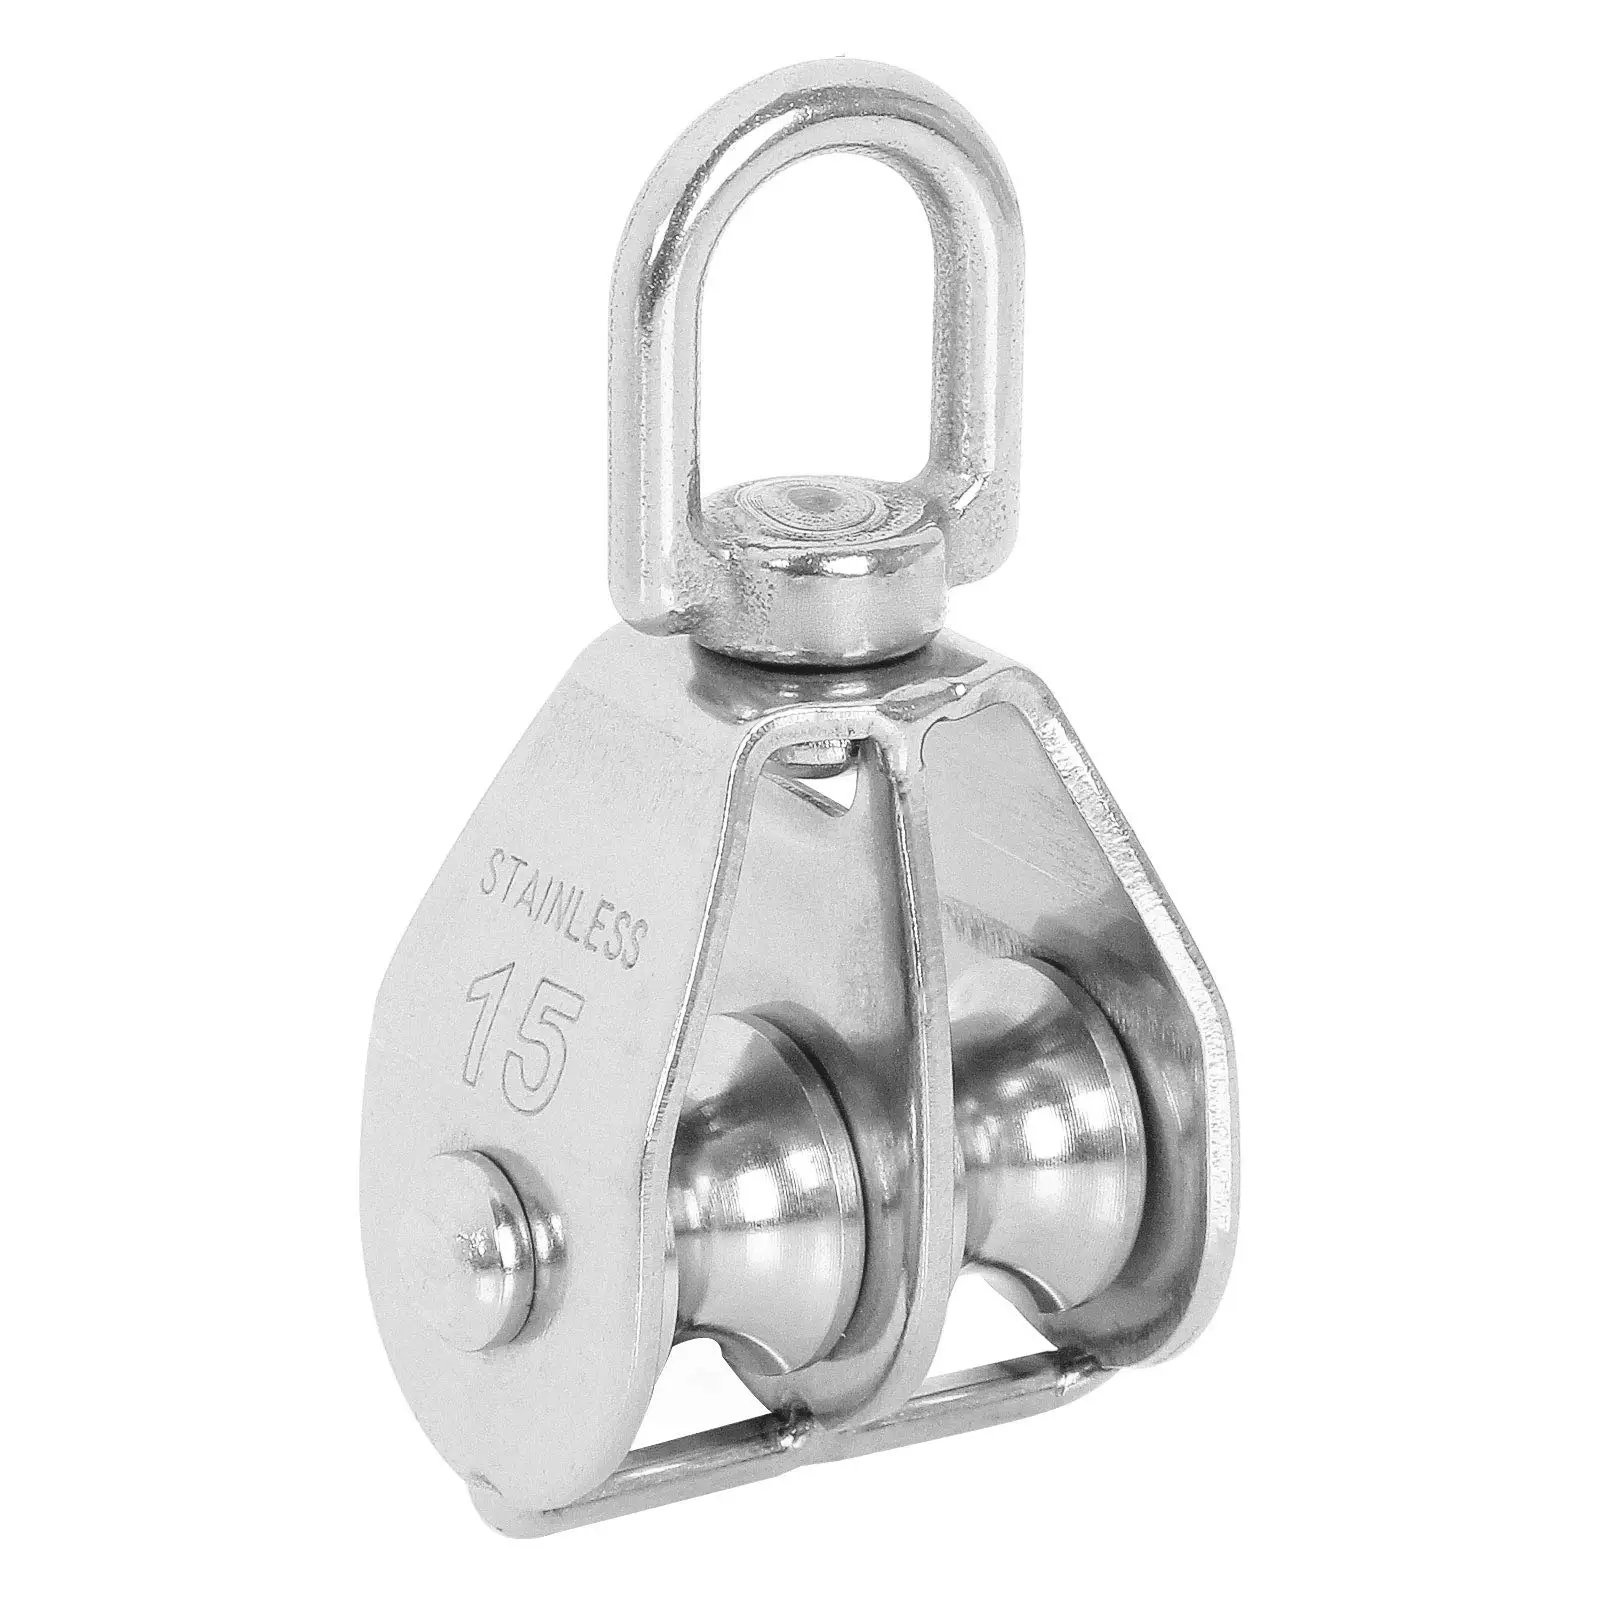 Double Pulley Block Hanging Wire Pulley Roller 304 Stainless Steel Heavy Duty Double Wheel Block Pulley for Lifting Rope (M15) m75 lifting single pulley loading 1322 lbs stainless steel heavy duty swivel lifting rope pulley block 75mm pulley hoists roller